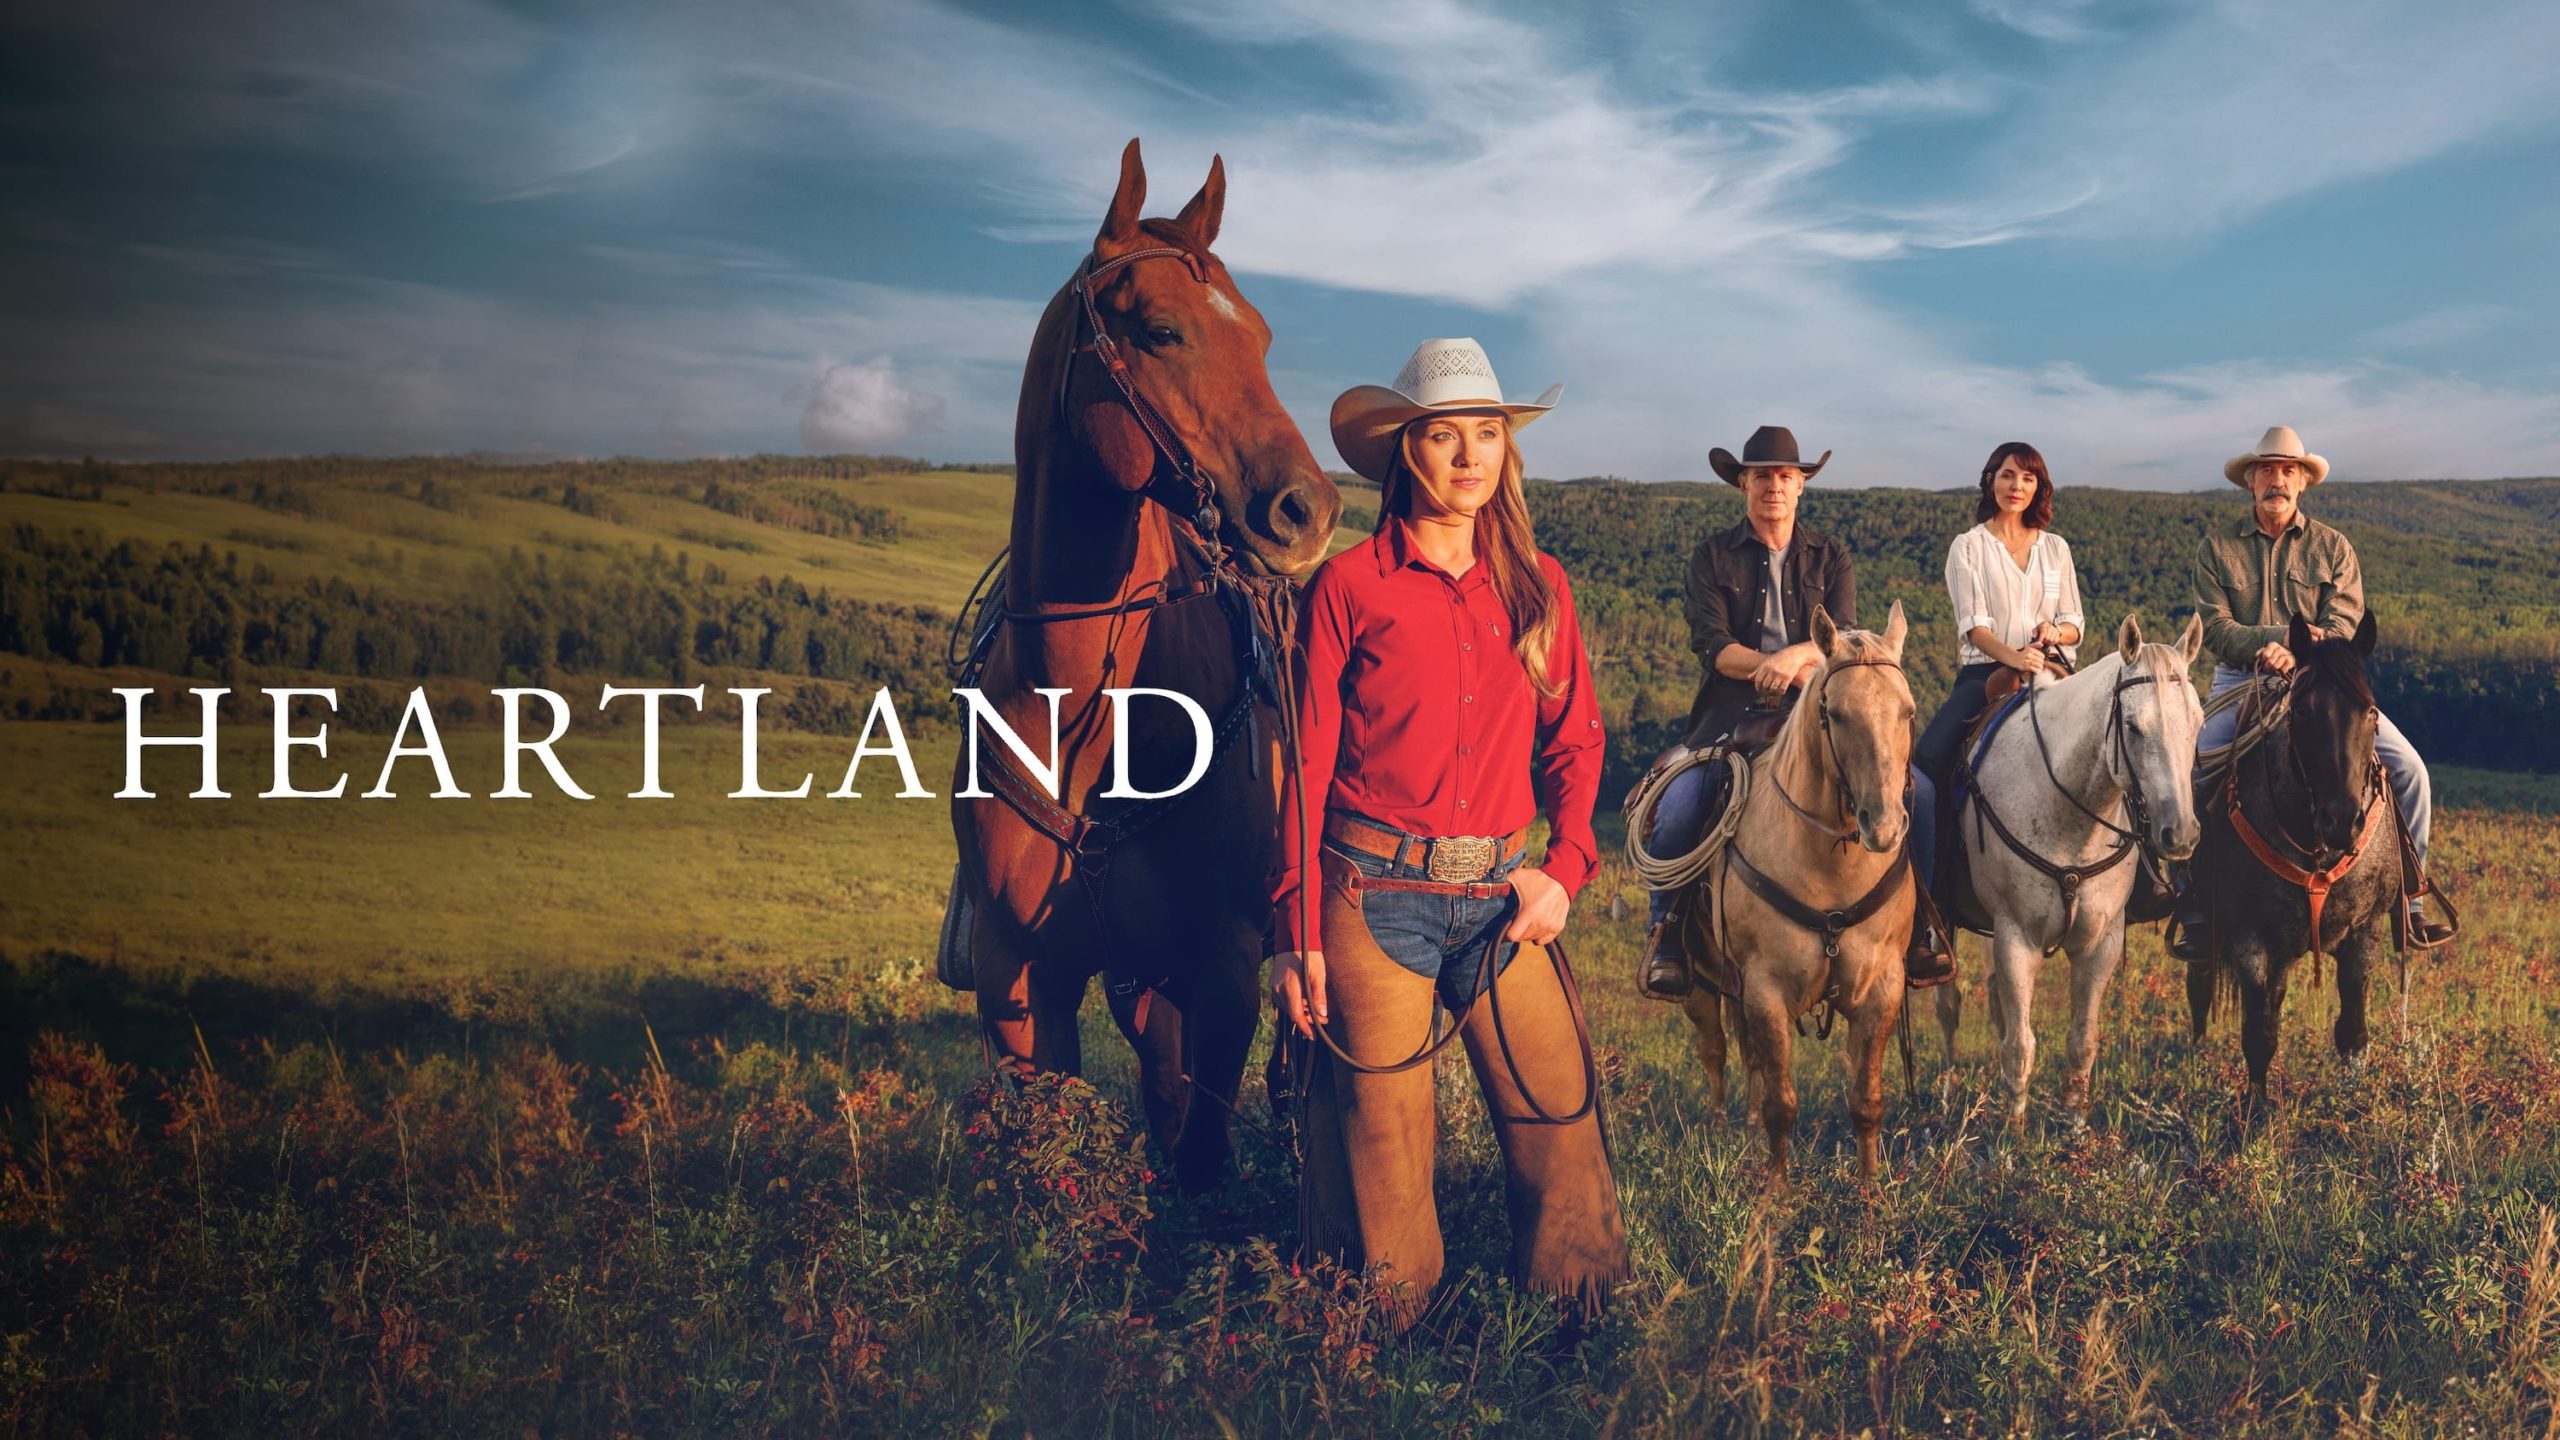 #Heartland: Season 17 of Canadian Ranch Drama Coming to UP Faith & Family This Month